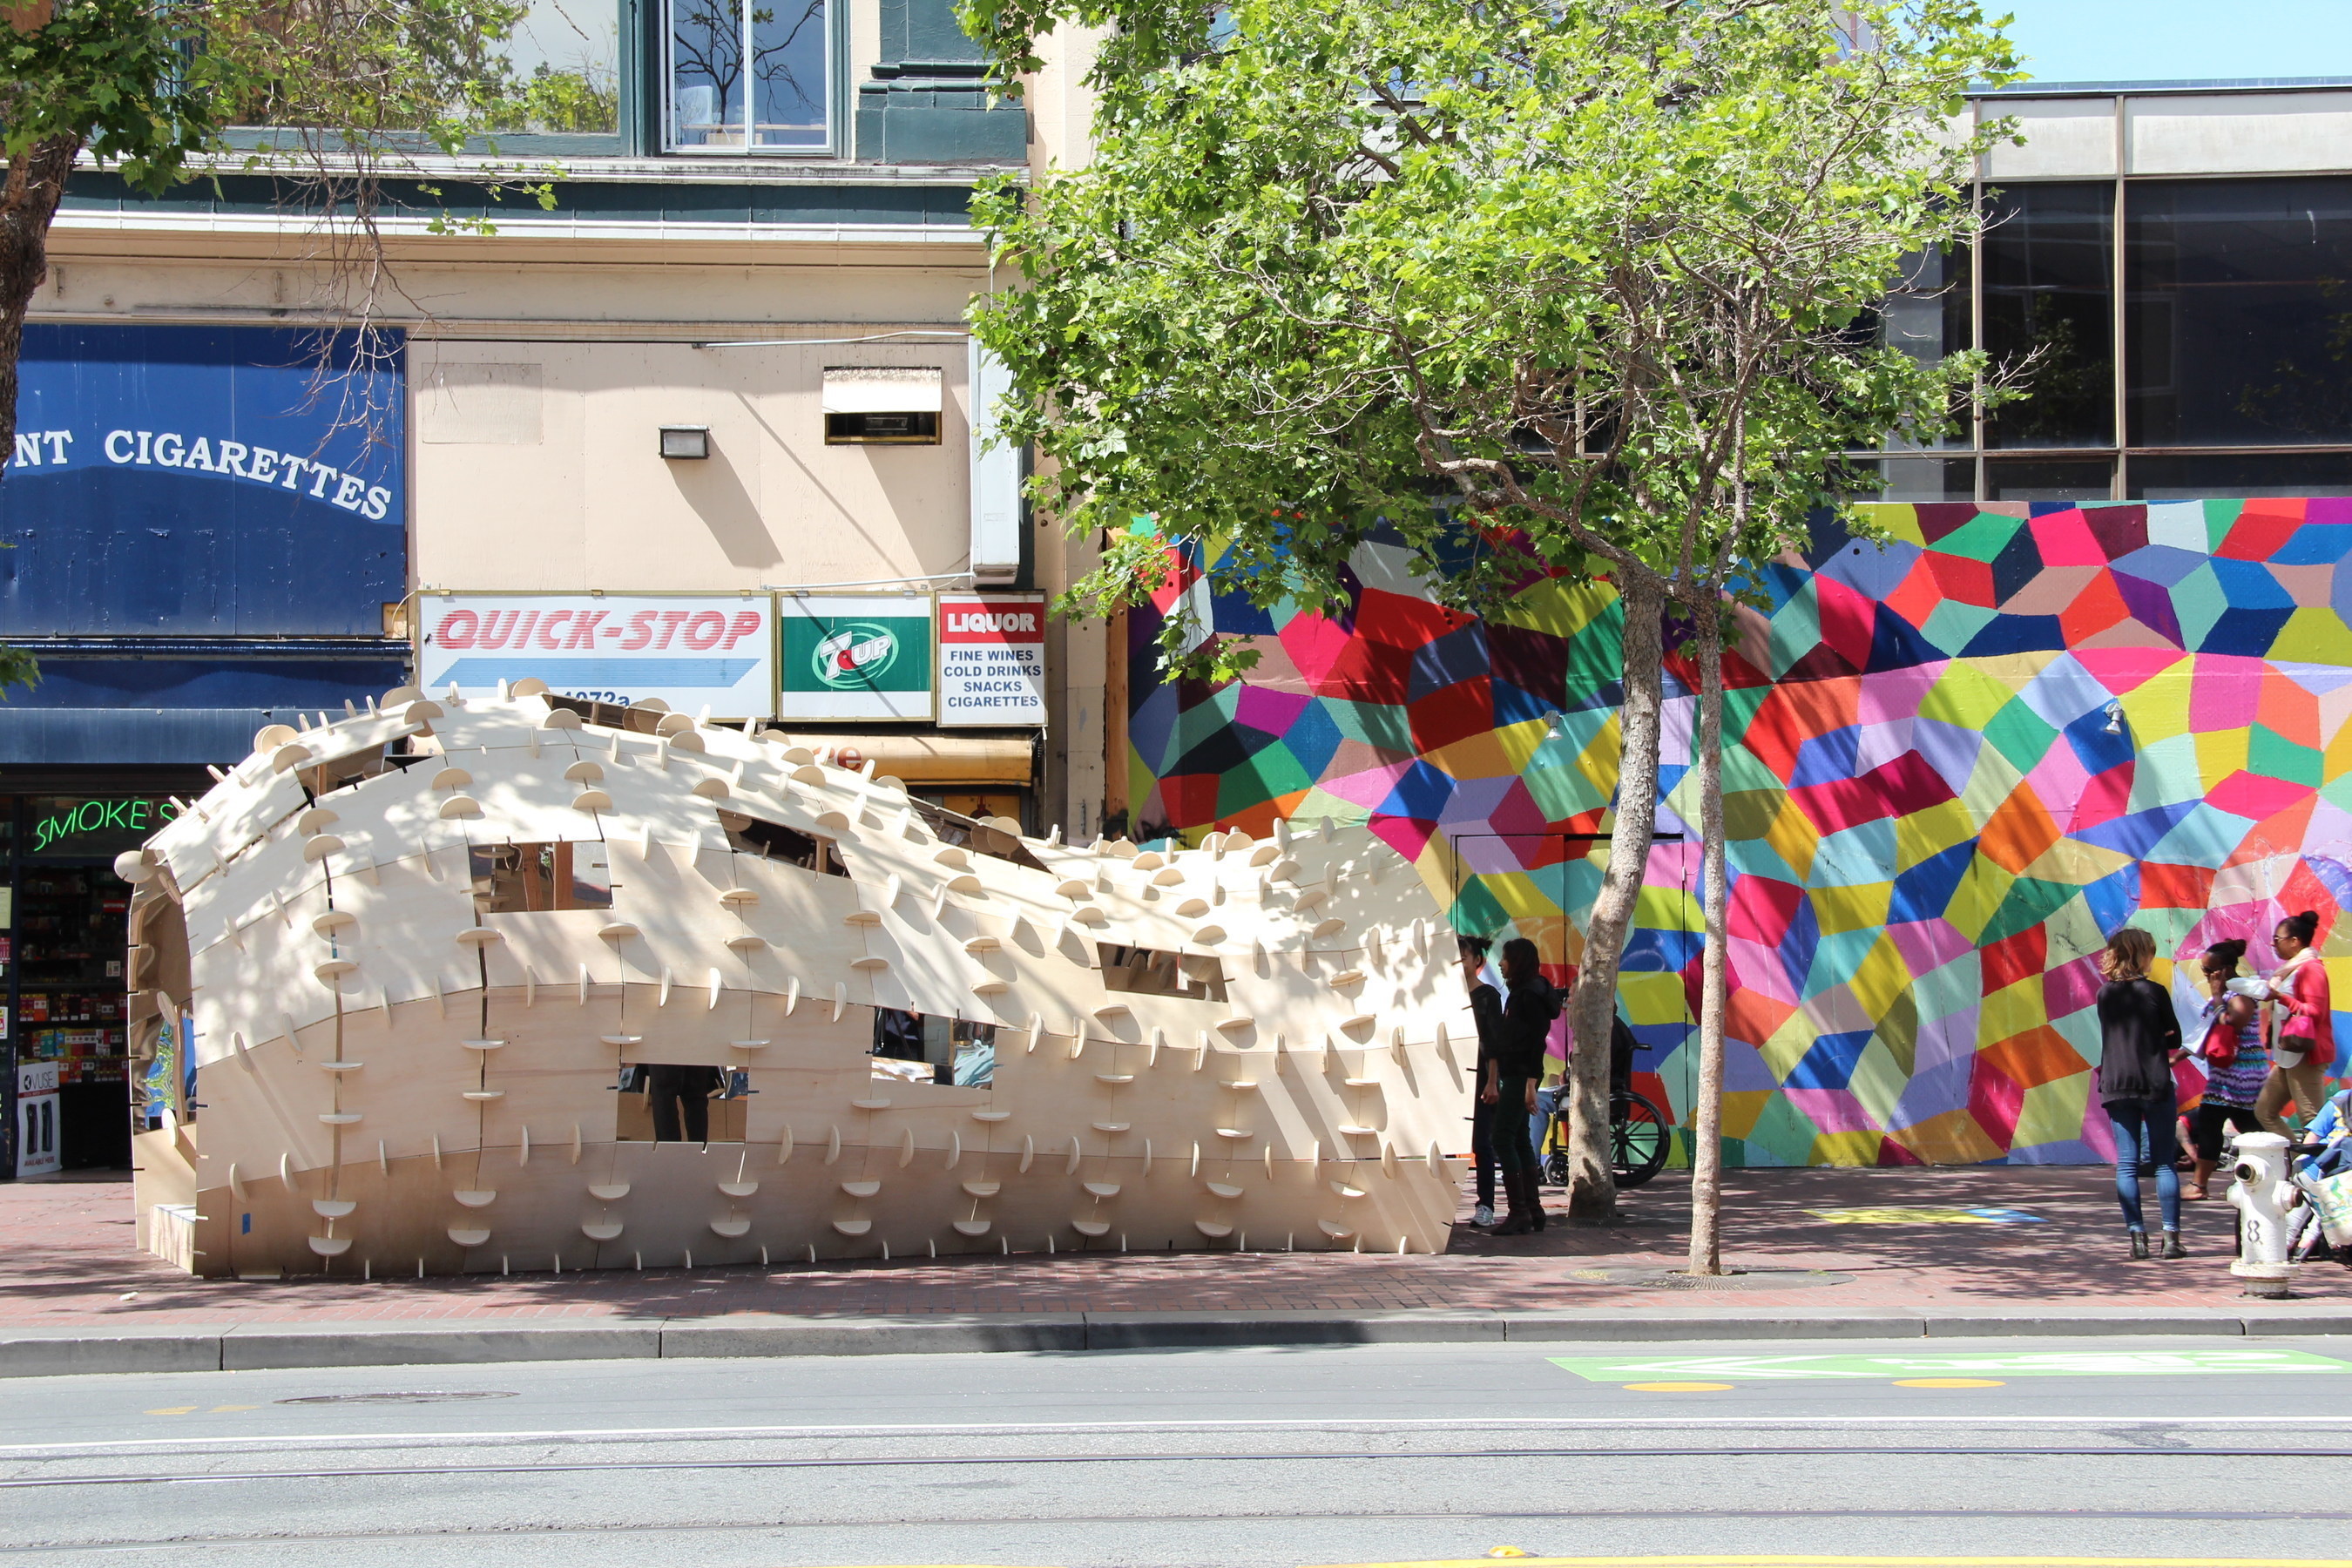 YBCA and San Francisco Planning Department Announce 2016 Open Call for Market Street Prototyping Festival